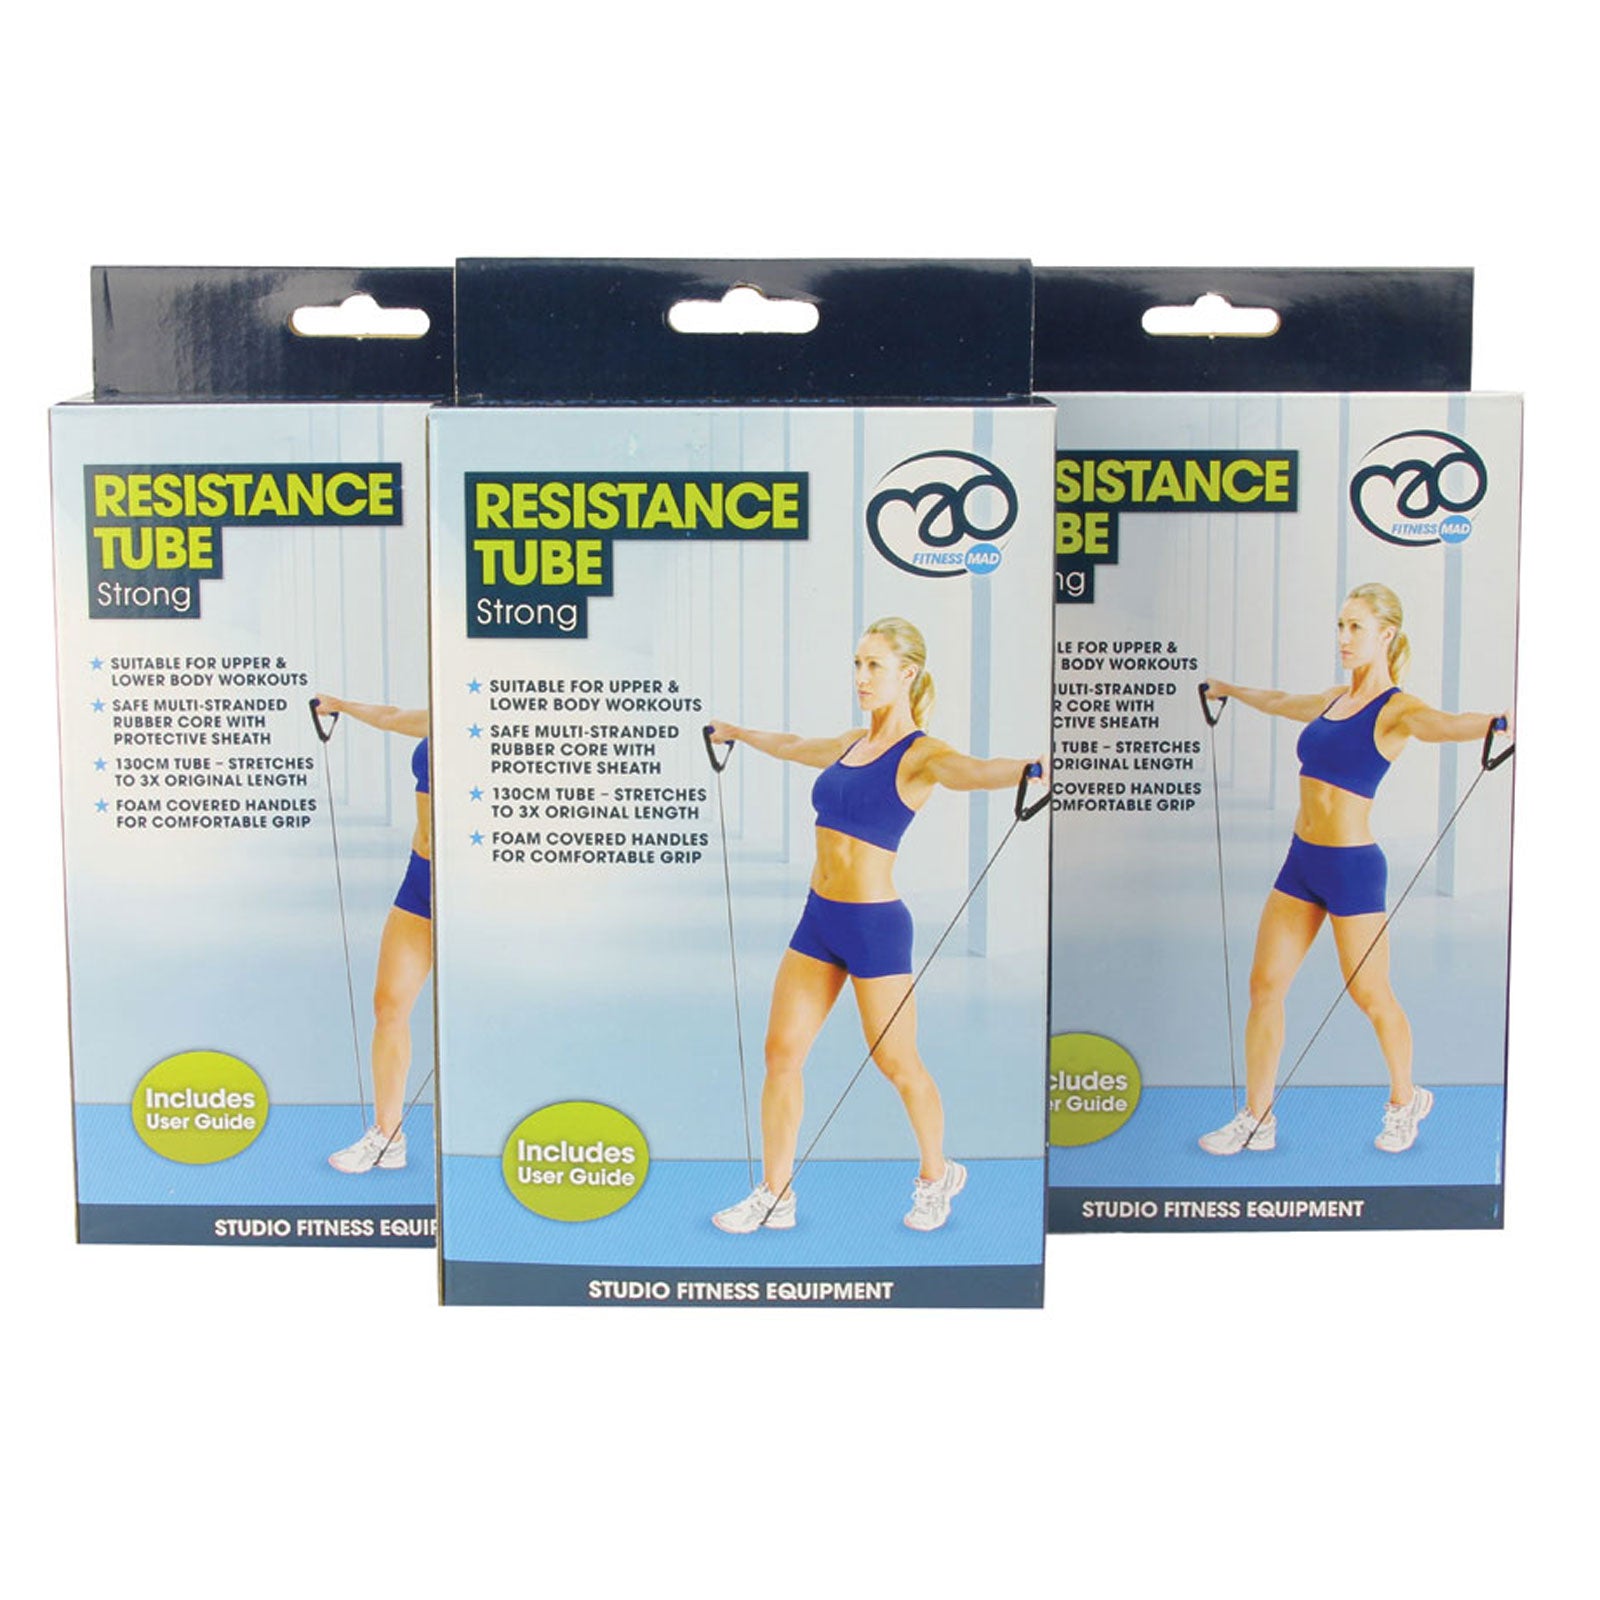 Resistance Tube and User Guide Strong Dark Blue Fitness Mad Alternate 2